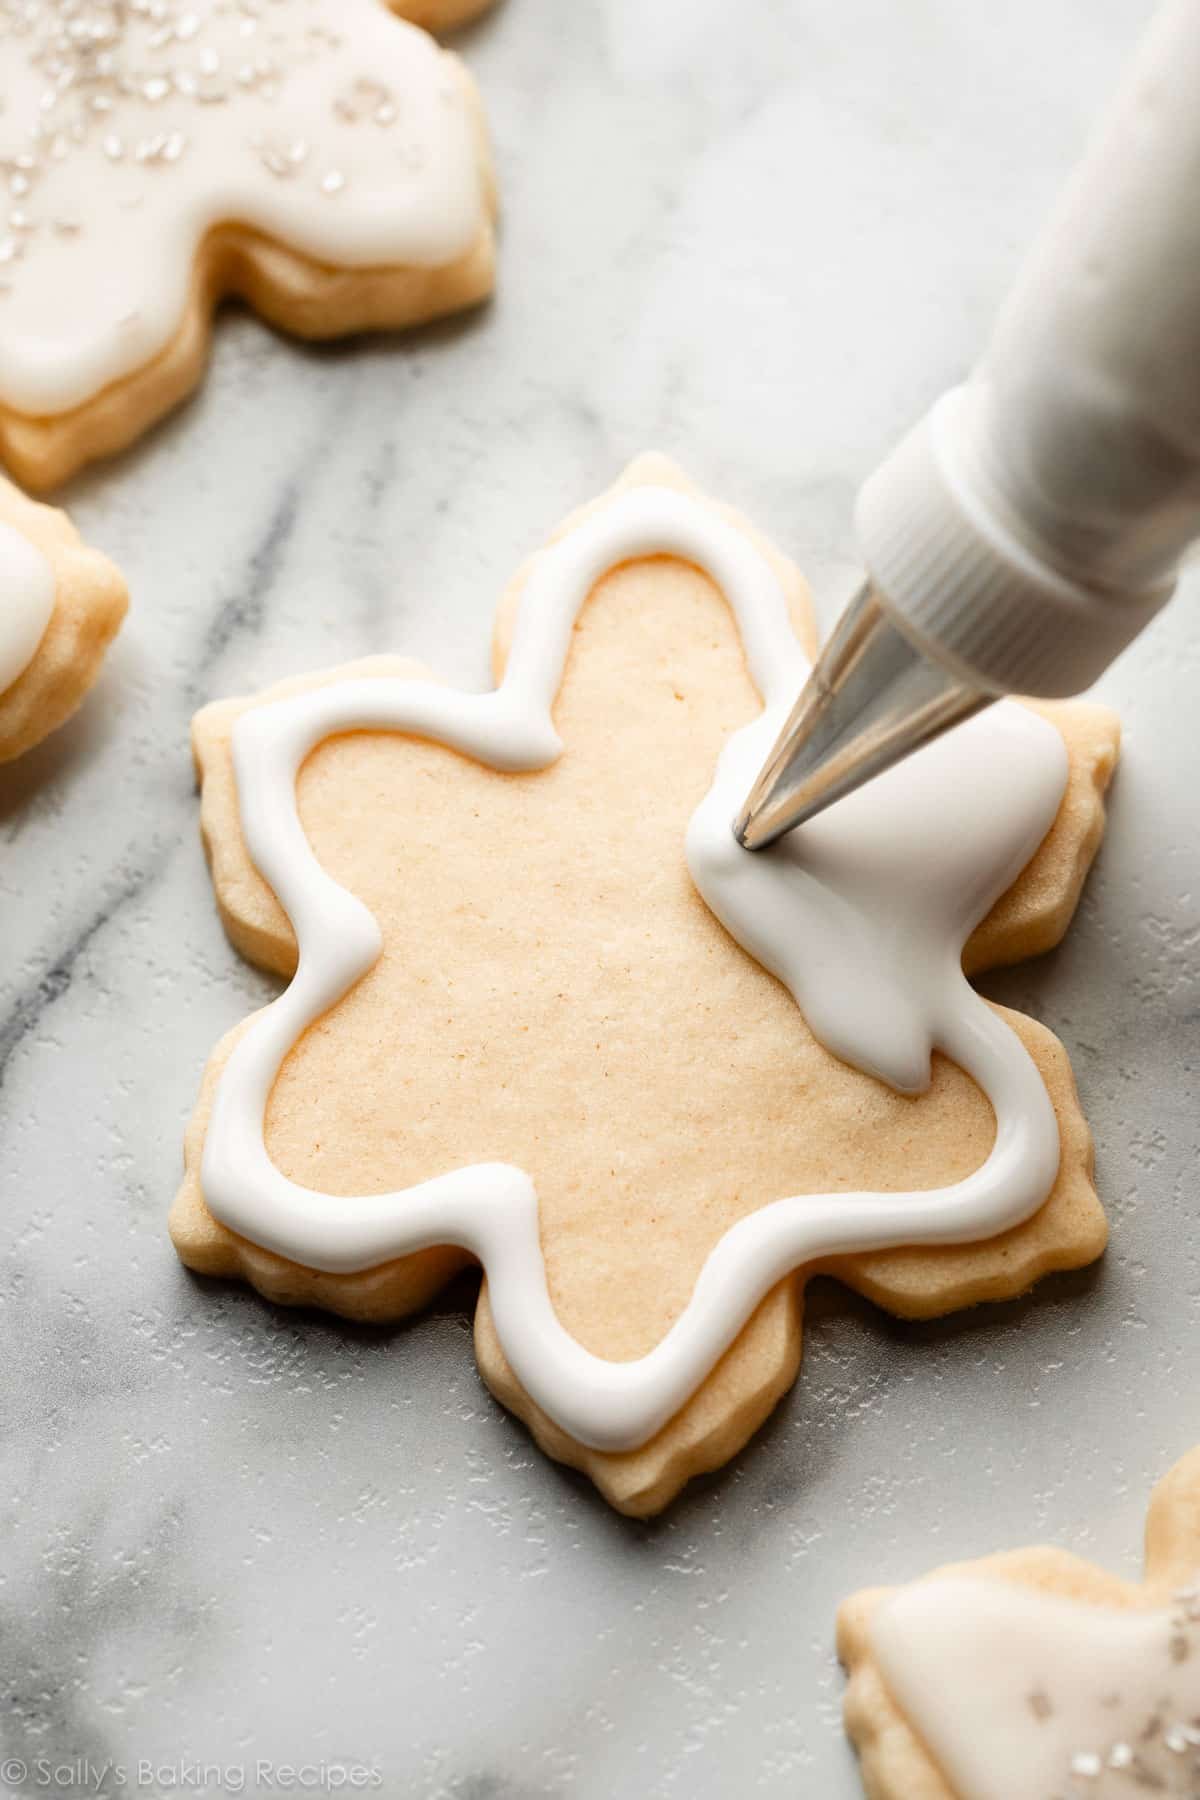 What Do You Need For Cookie Decorating Supplies? - Your Baking Bestie